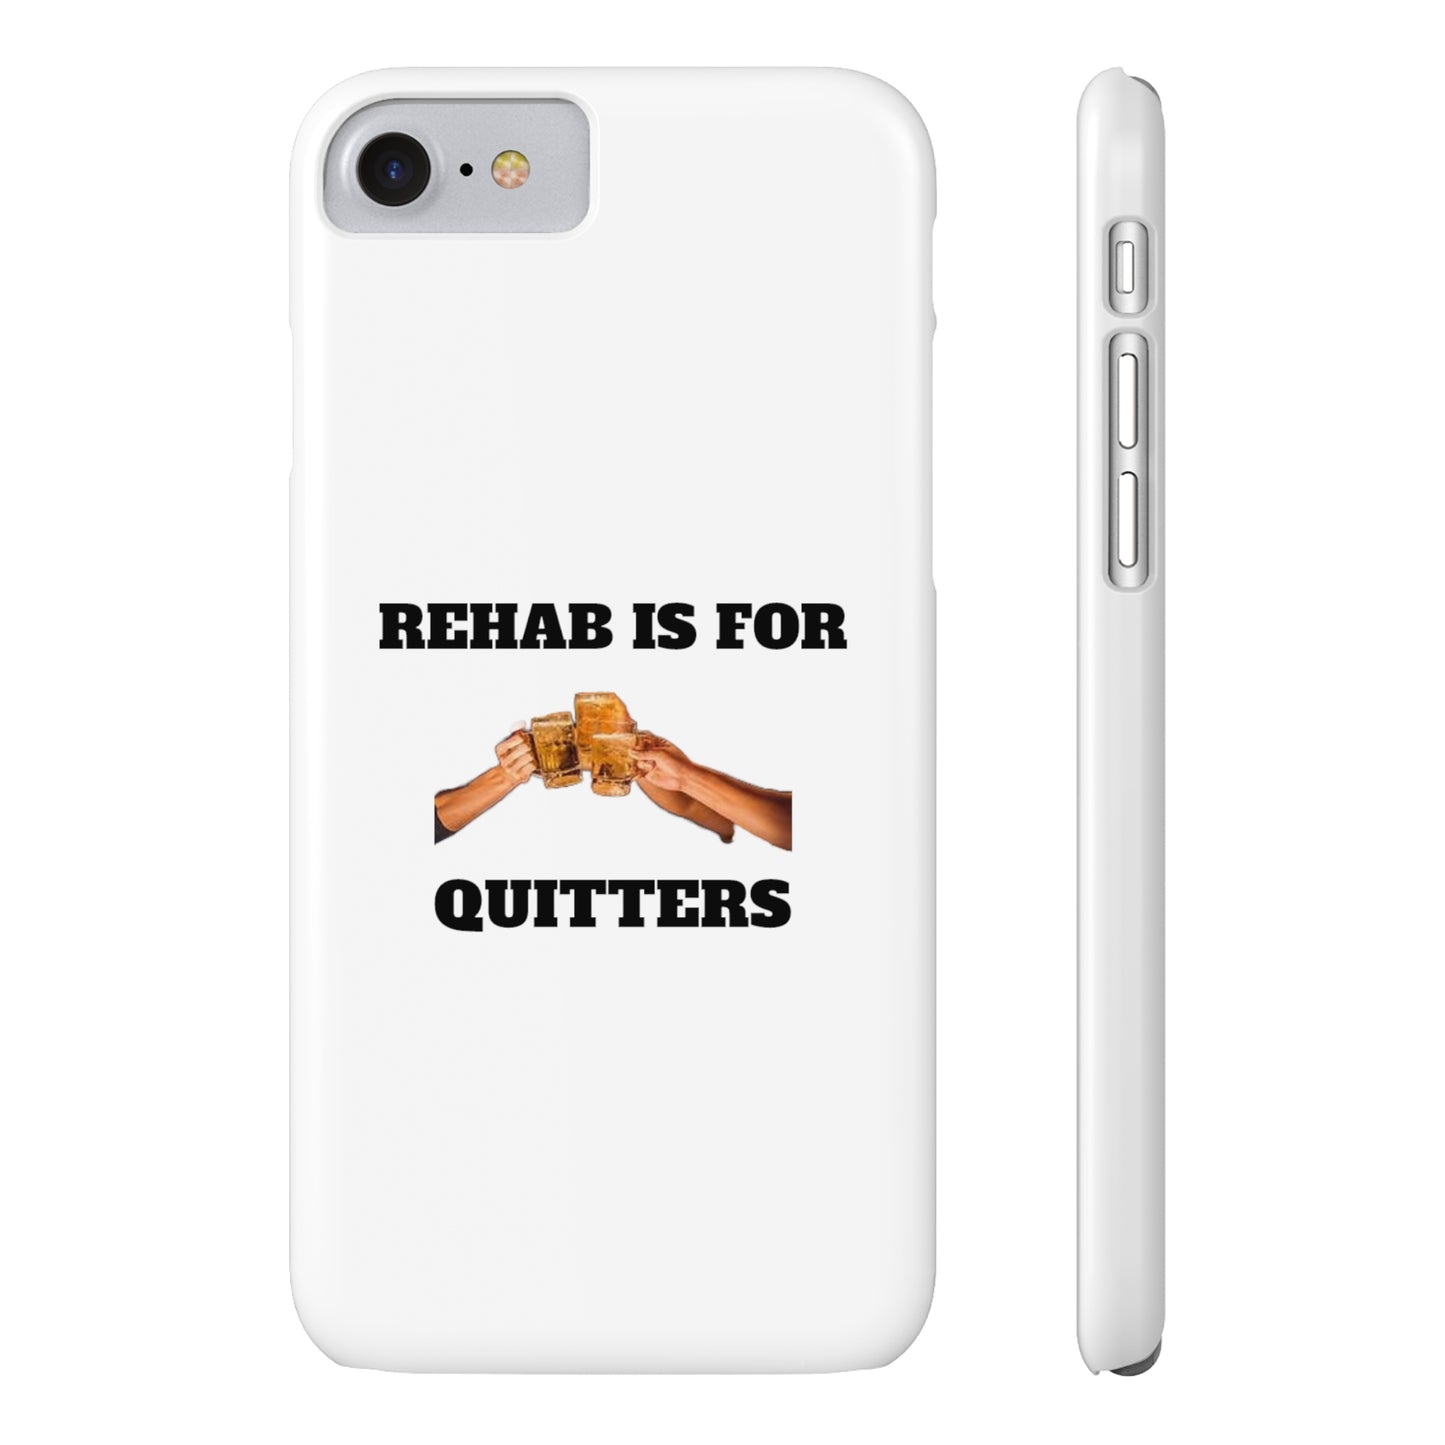 "Rehab Is For Quitters" Phone Cases iPhone 7, iPhone 8 Slim